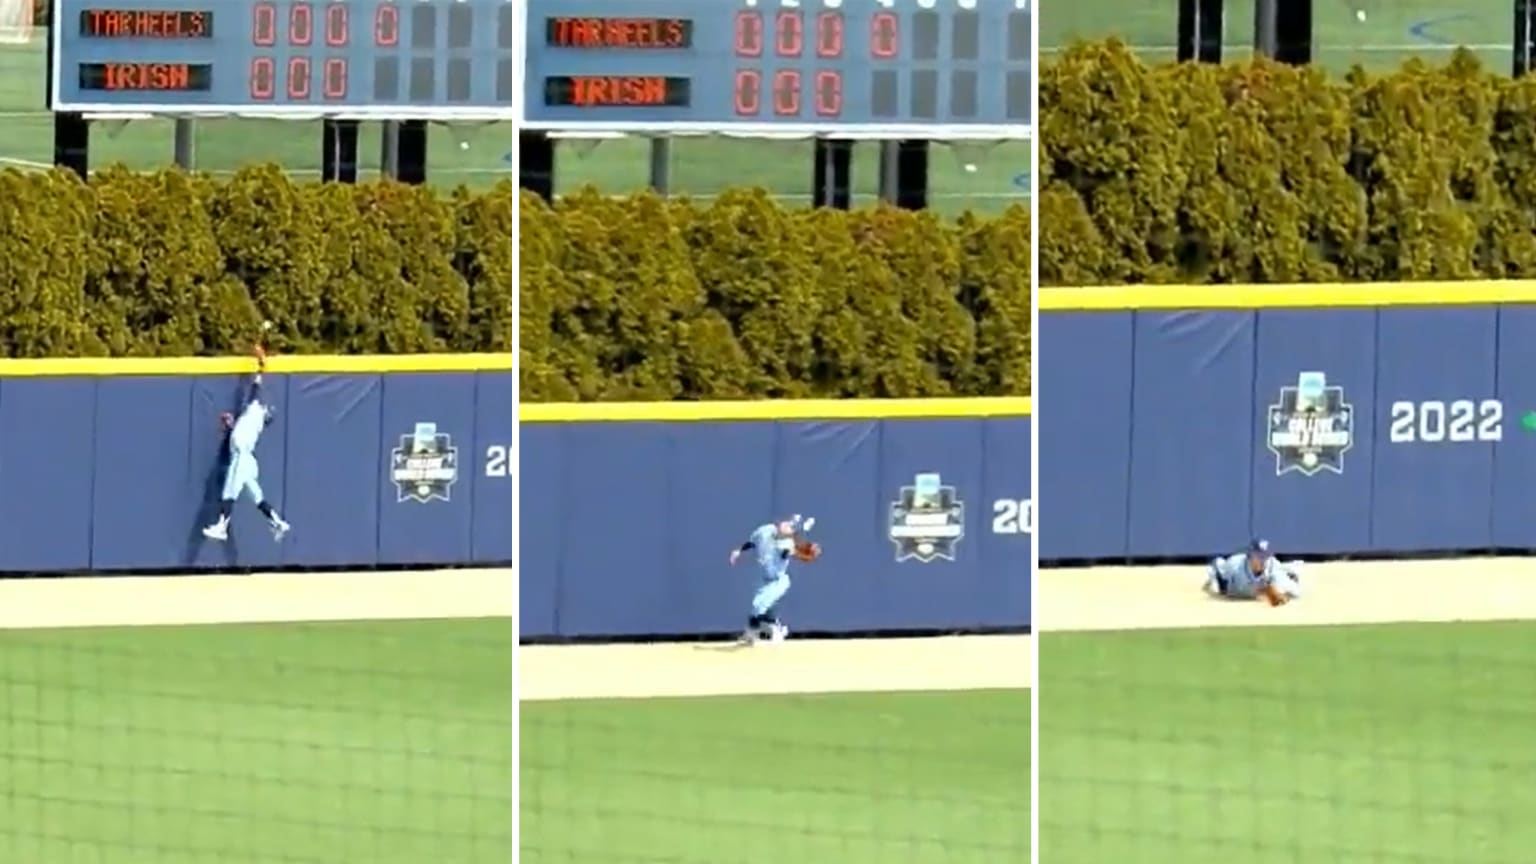 A split photo shows an outfielder leaping at the fence and then falling to the ground while making a catch